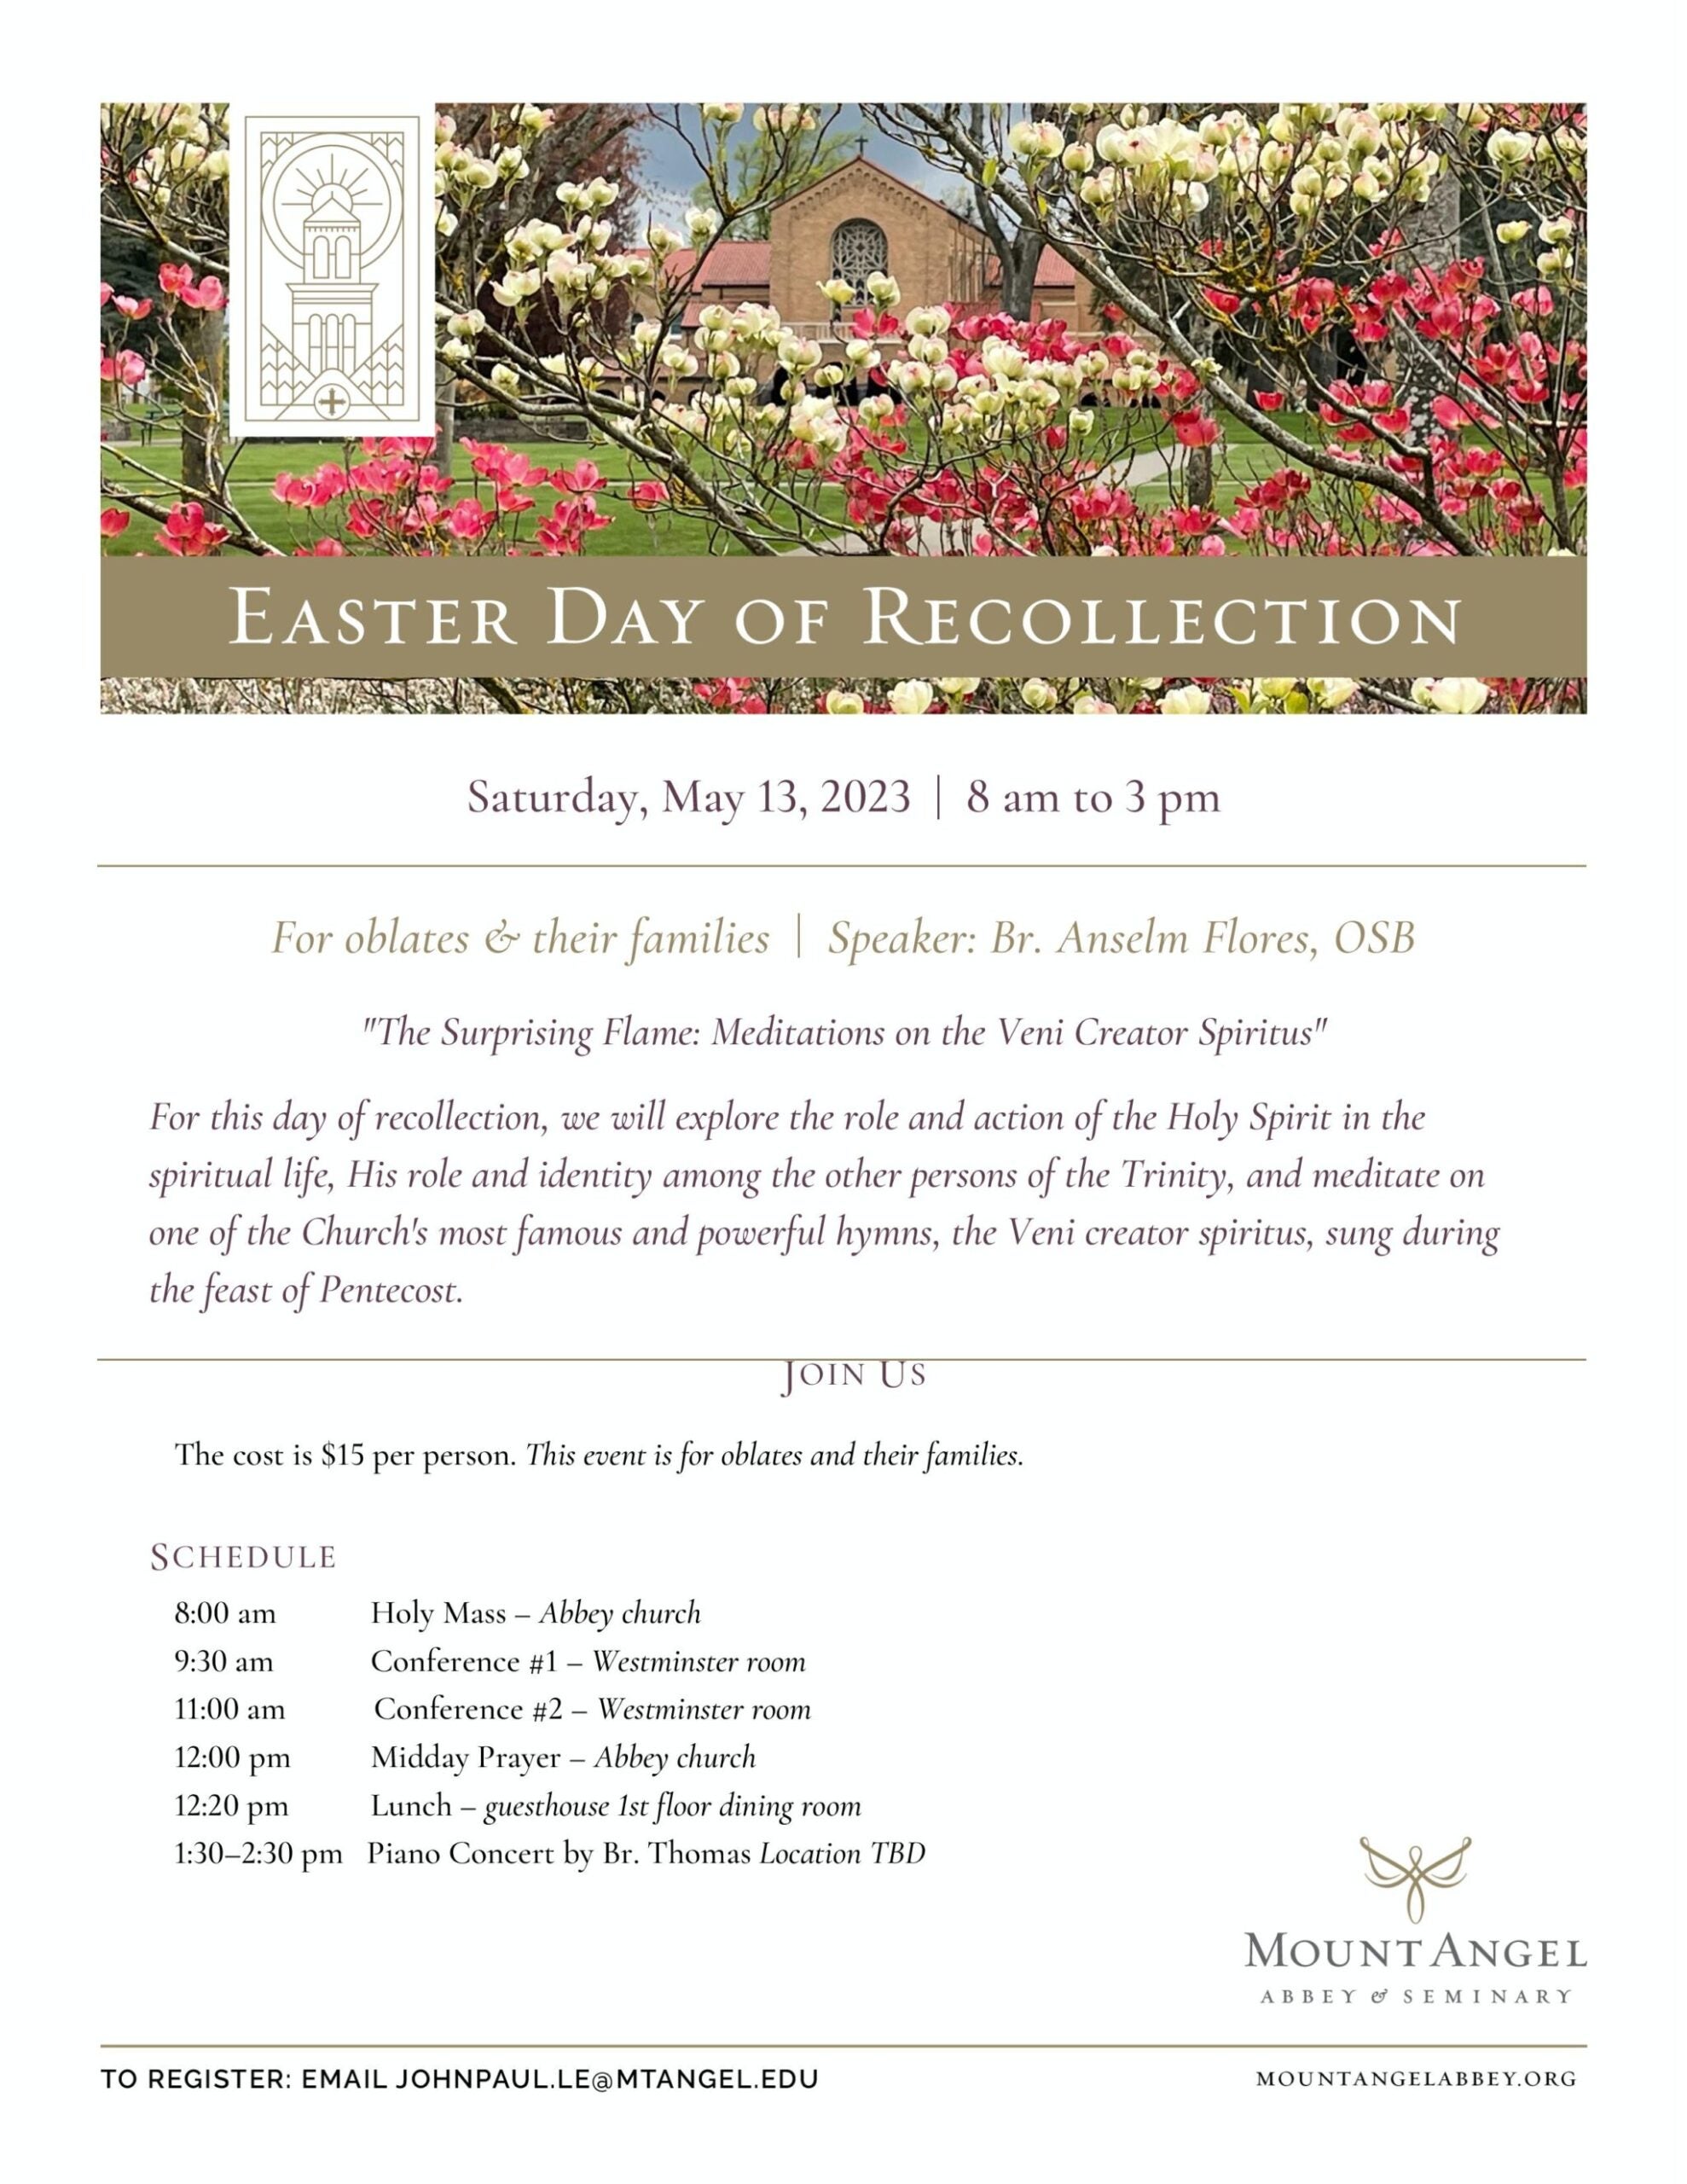 Easter Day of Recollection